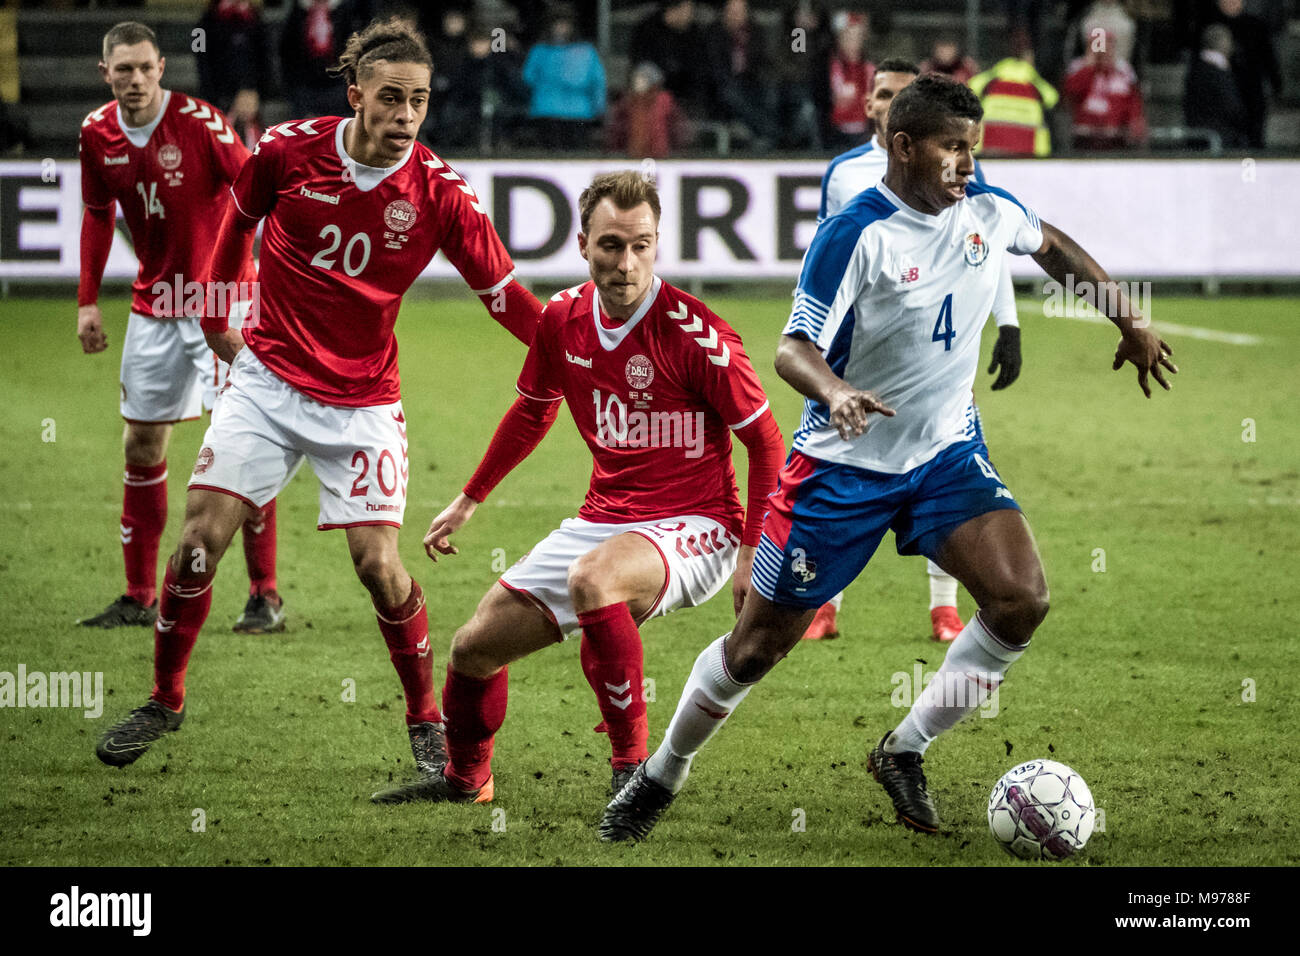 Denmark, Brøndby - March 22, 2018. Yussuf Poulsen (20) and Christian Eriksen (10) of Denmark seen with Fidel Escobar (4) of Panama during the football friendly between Denmark and Panama at Brøndby Stadion. (Photo credit: Gonzales Photo - Kim M. Leland). Credit: Gonzales Photo/Alamy Live News Stock Photo